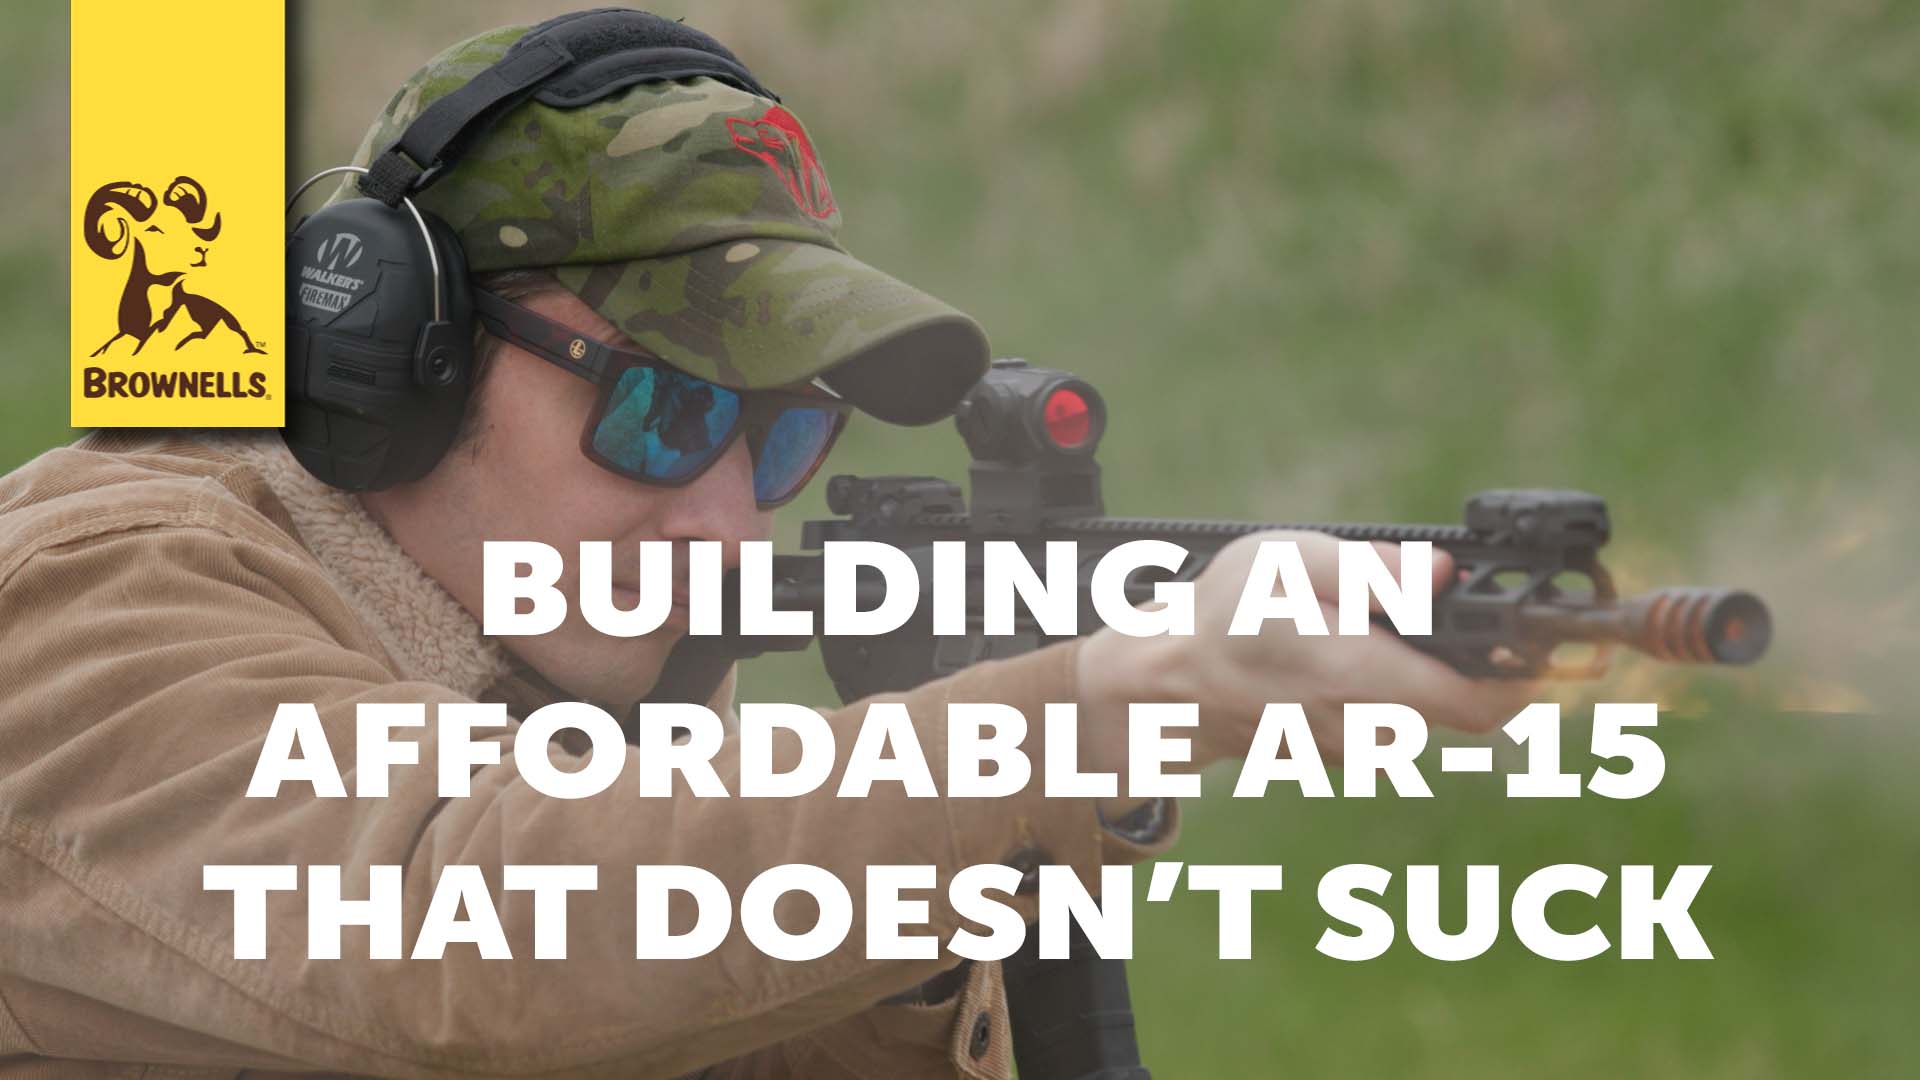 Building an Affordable AR-15 That Doesn't Suck